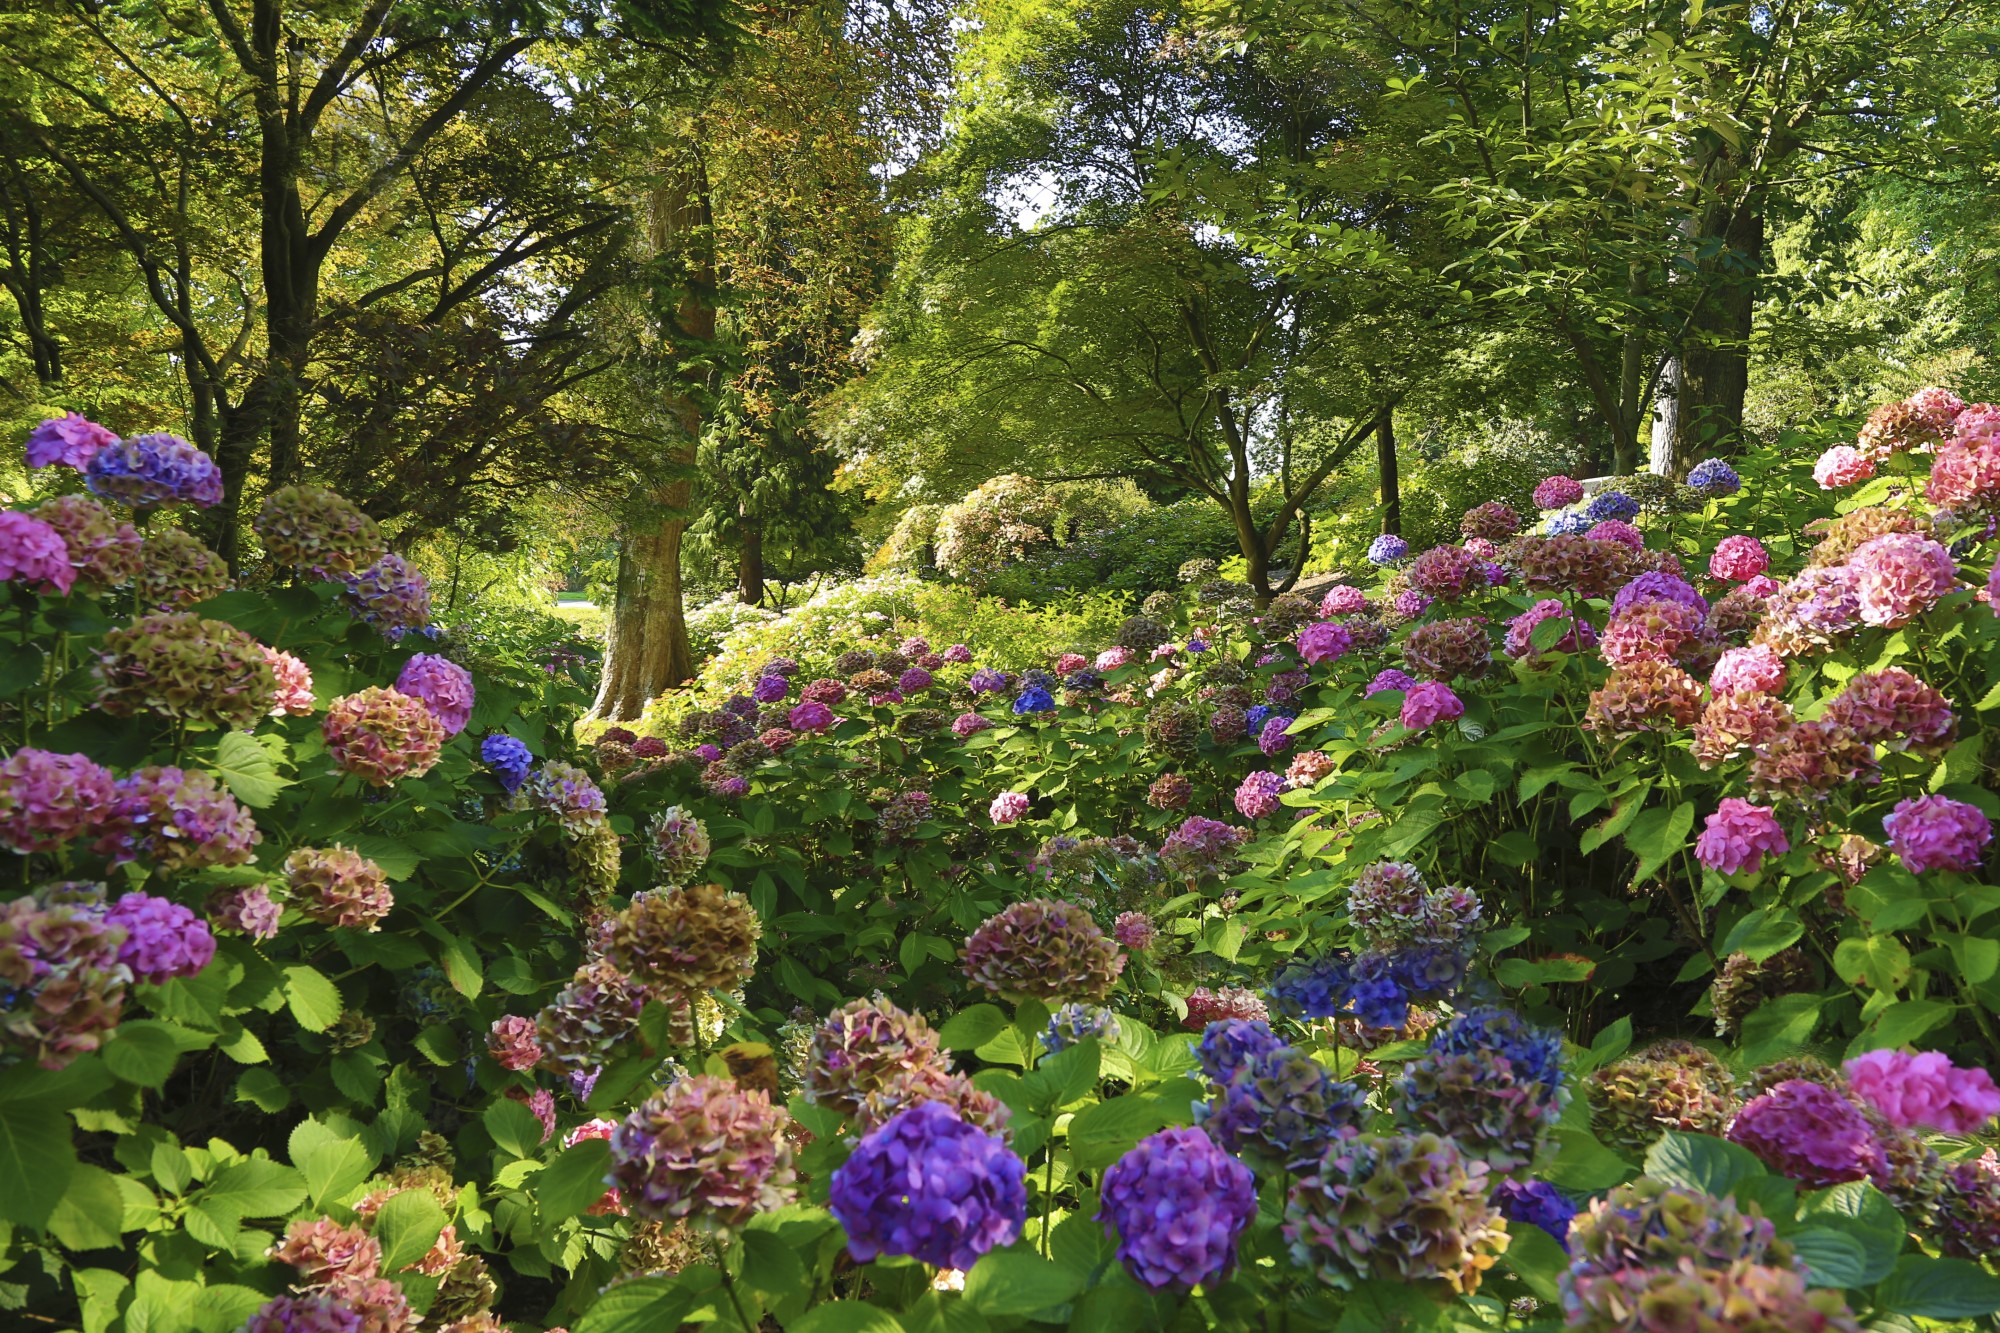 The Valley Gardens. Hydrangeas surrounded by trees.